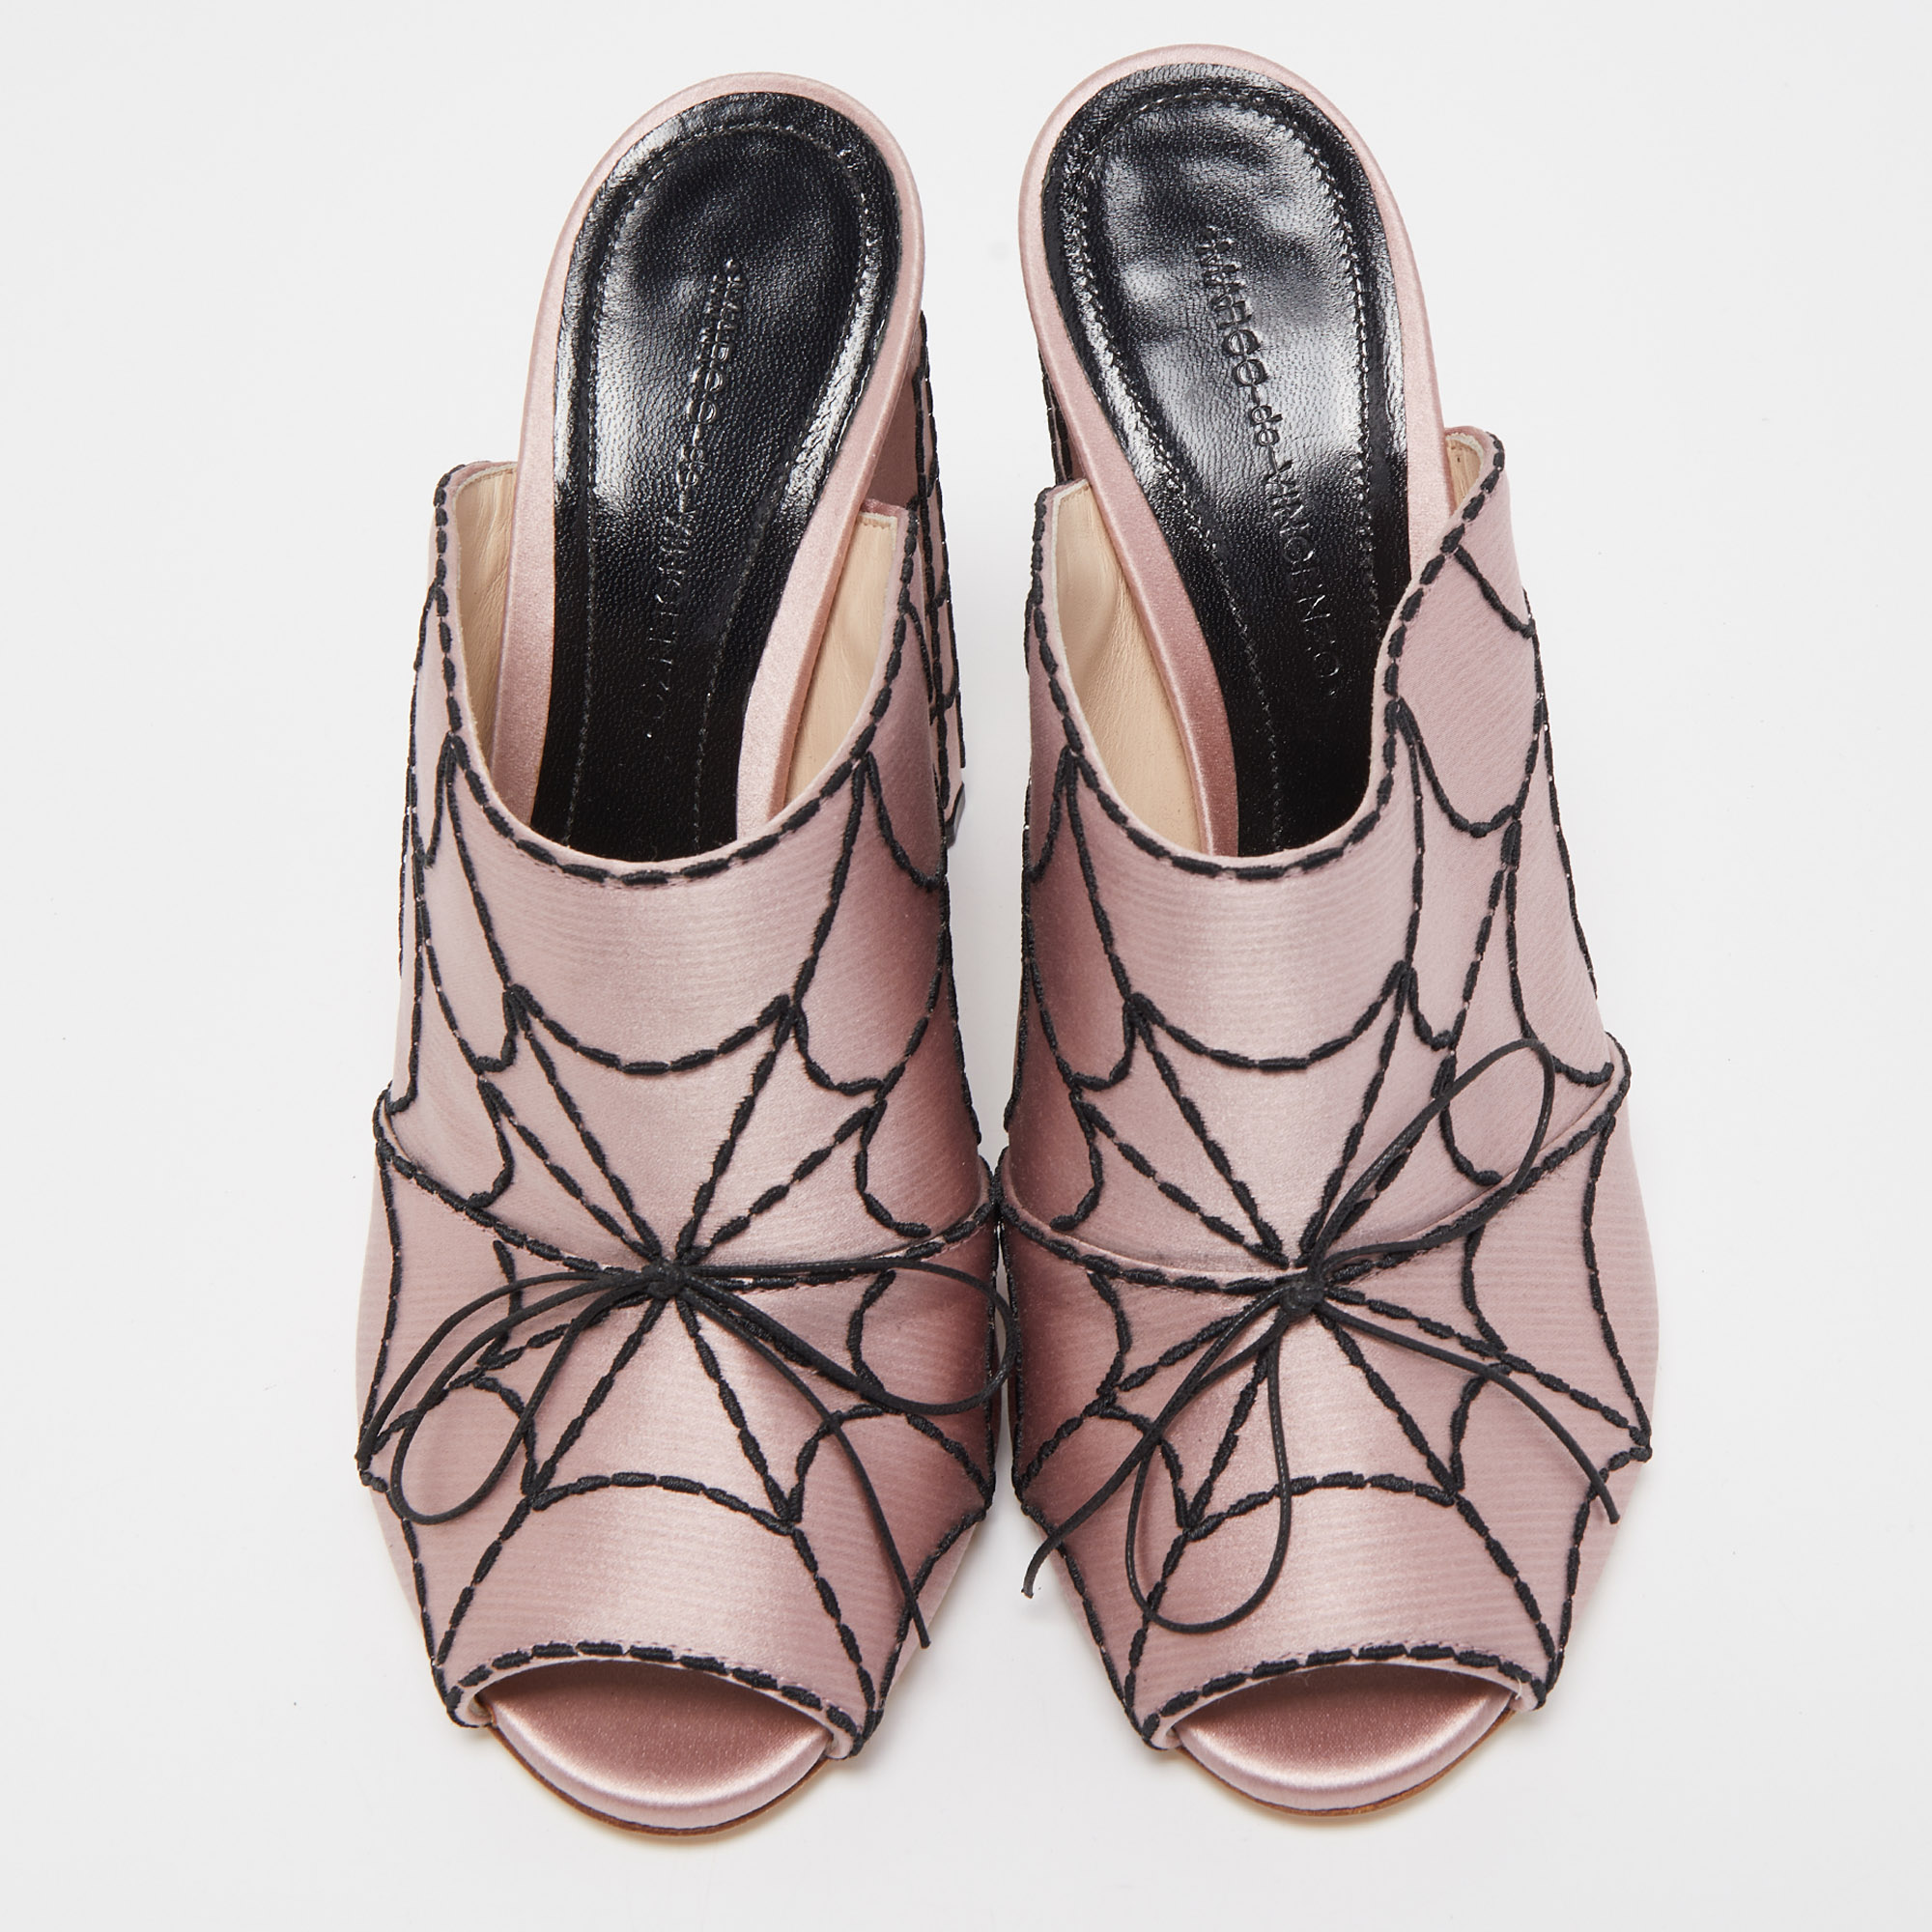 Marco De Vincenzo Pink Satin Spider Web Embroidered Open Toe Mules Size 39.5